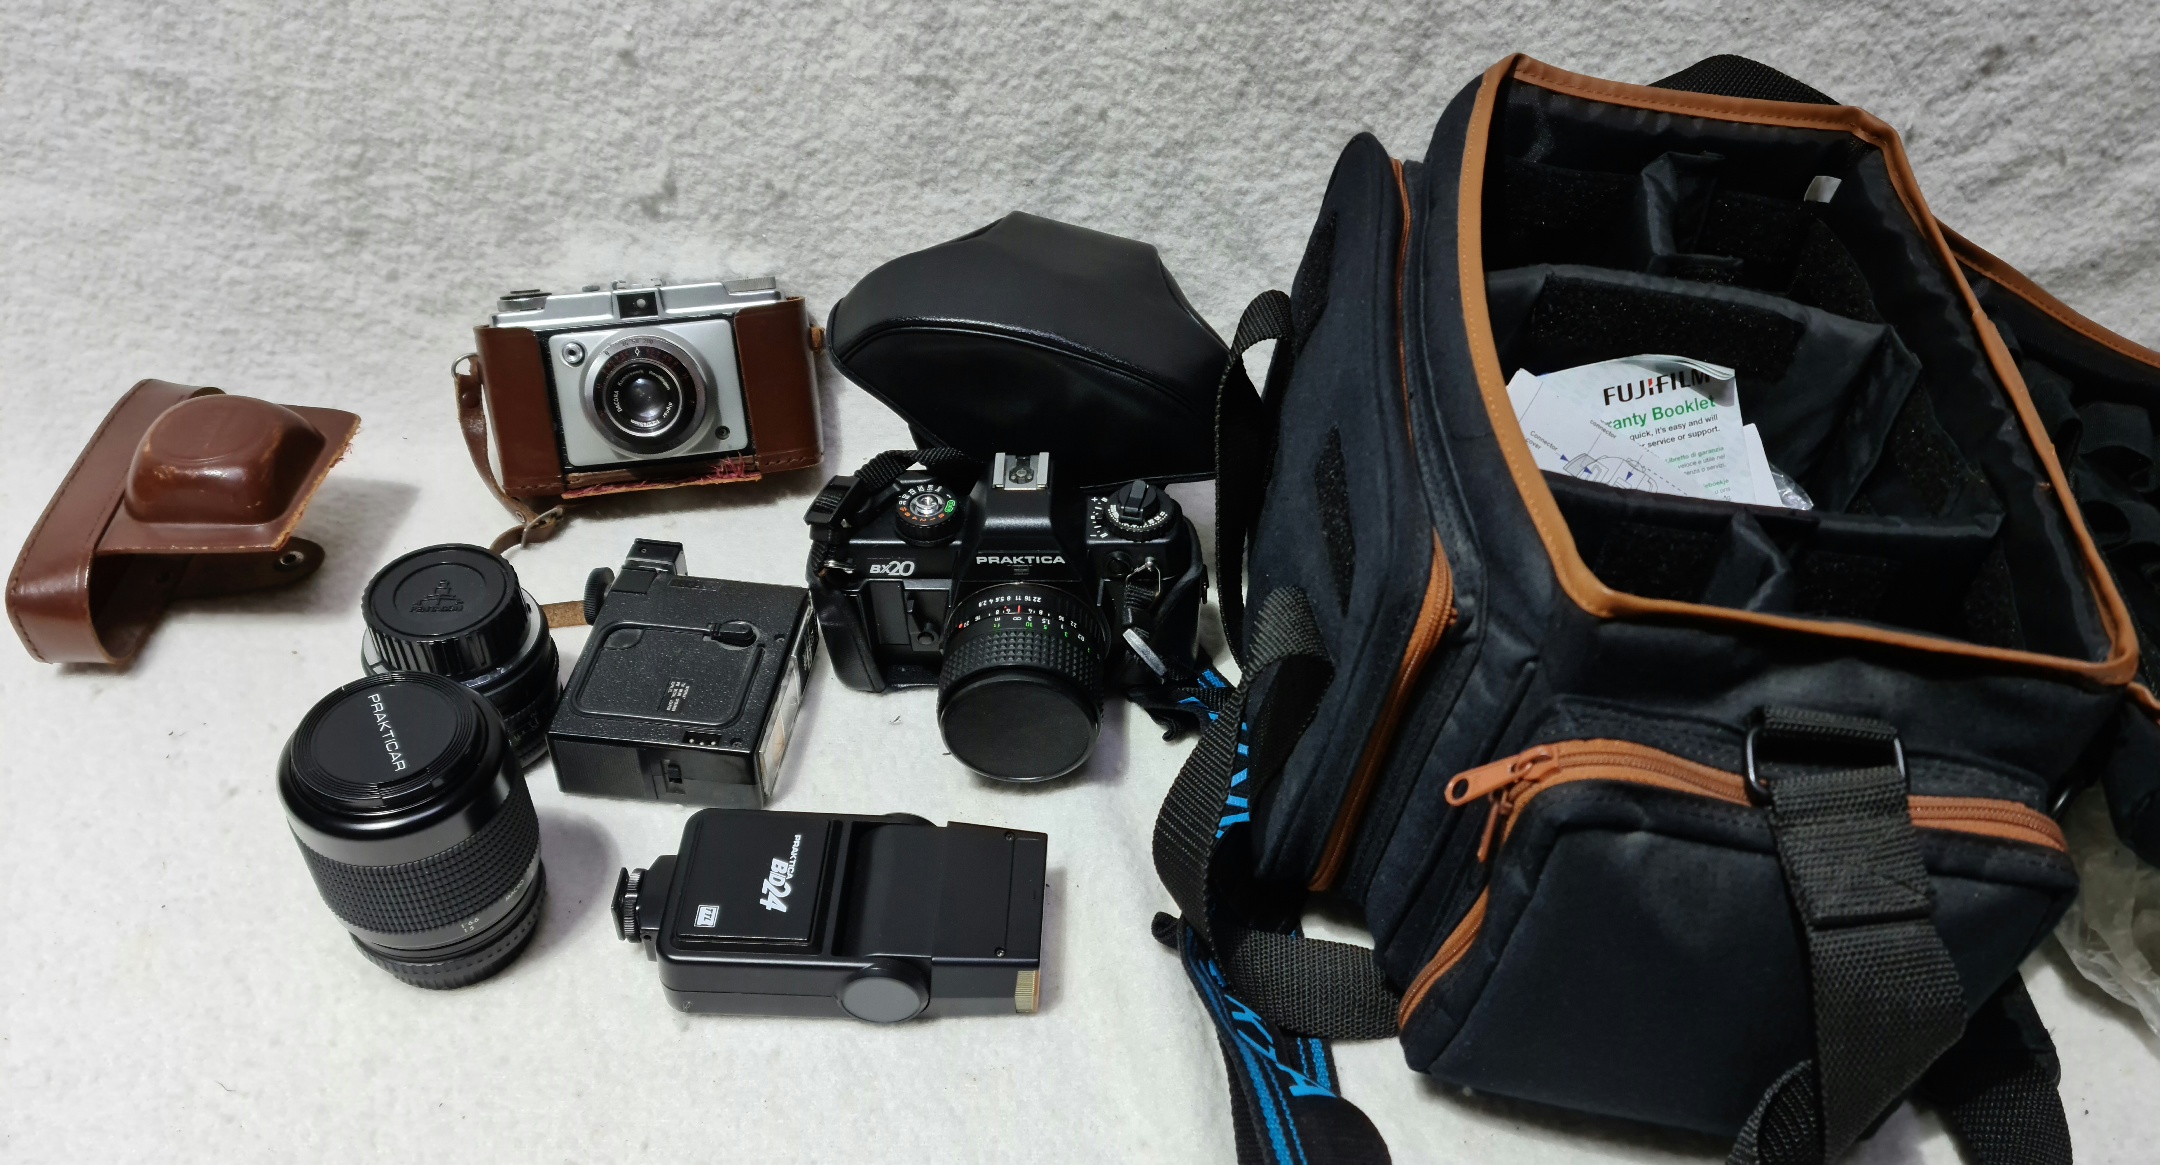 A Praktica Bx20 with lenses and flash in bag and a Iford sportsman vintage camera